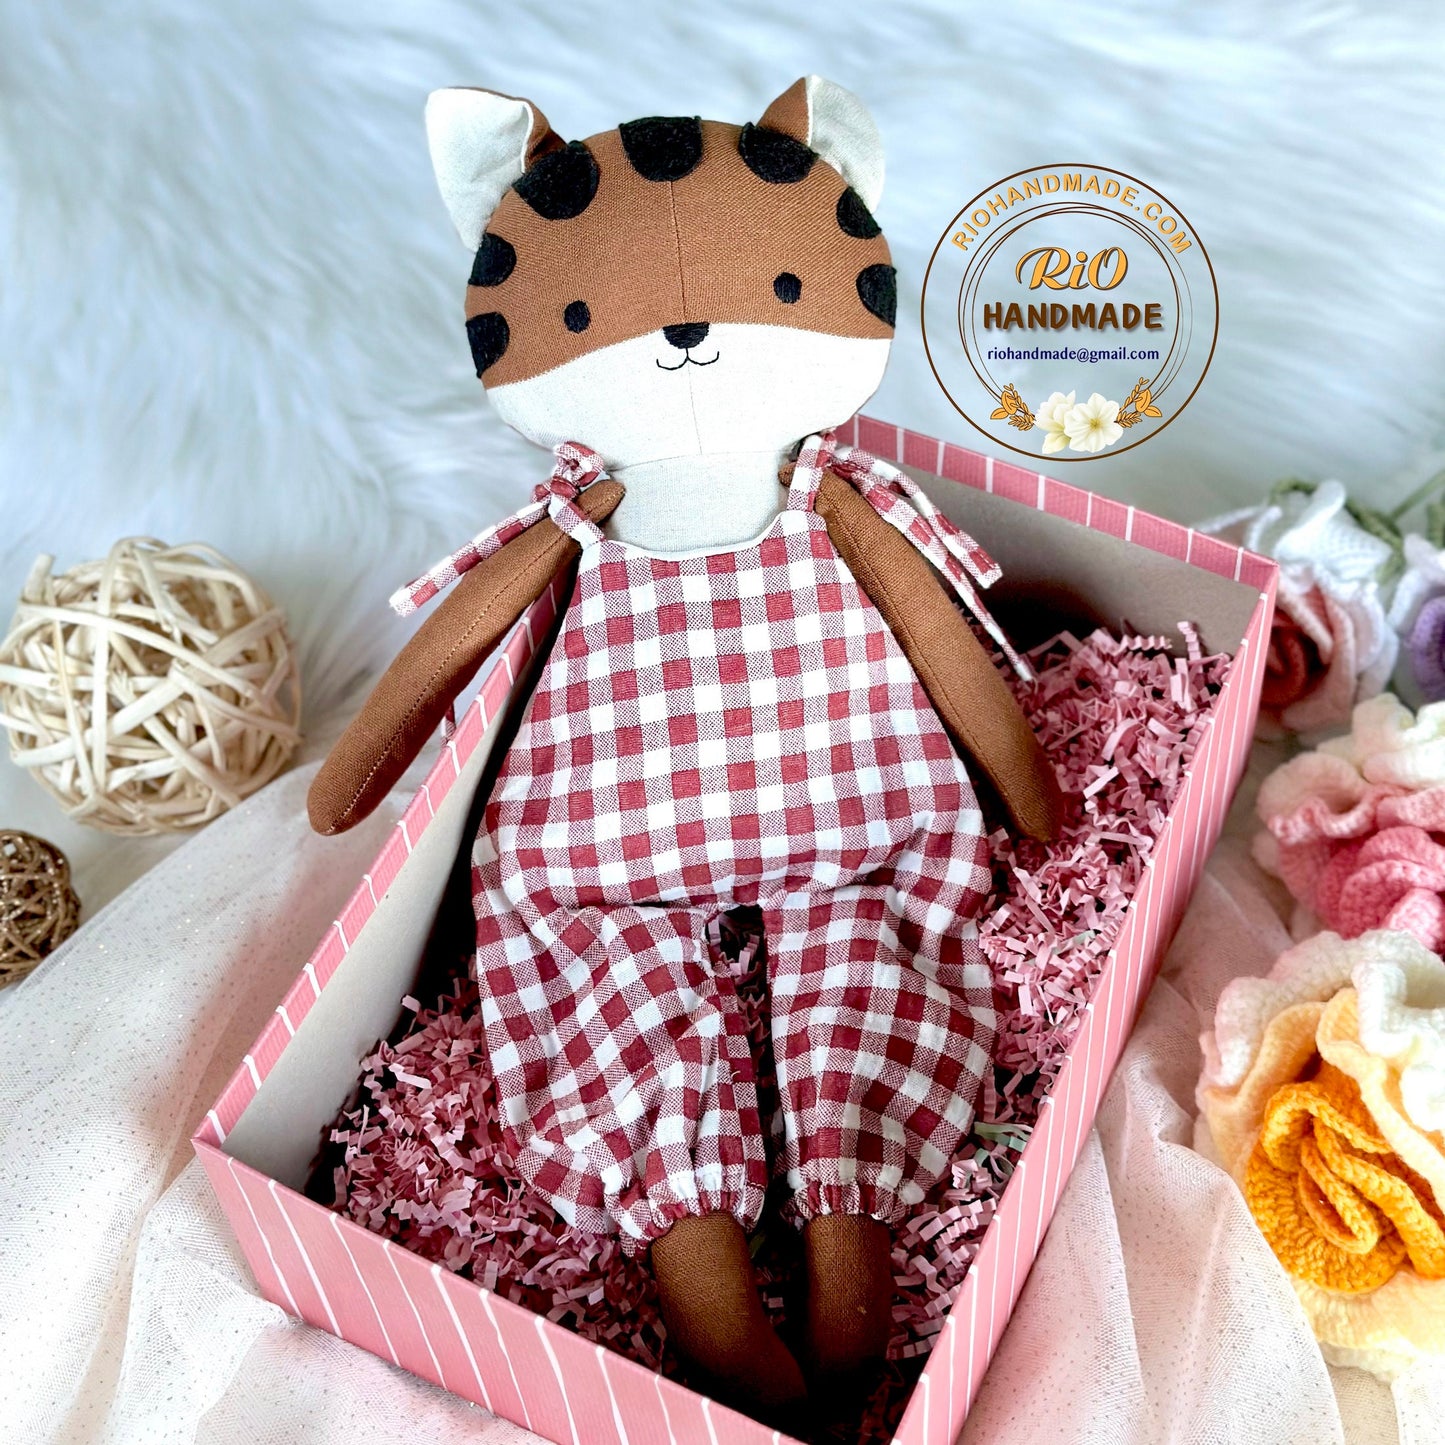 Ready To Ship, Rio Handmade Linen Tiger Toy, Nursery Decor Stuffed, Linen Baby Toy, Soft Stuffed Tiger Toy For Toddler, Kid, Adult Hobby